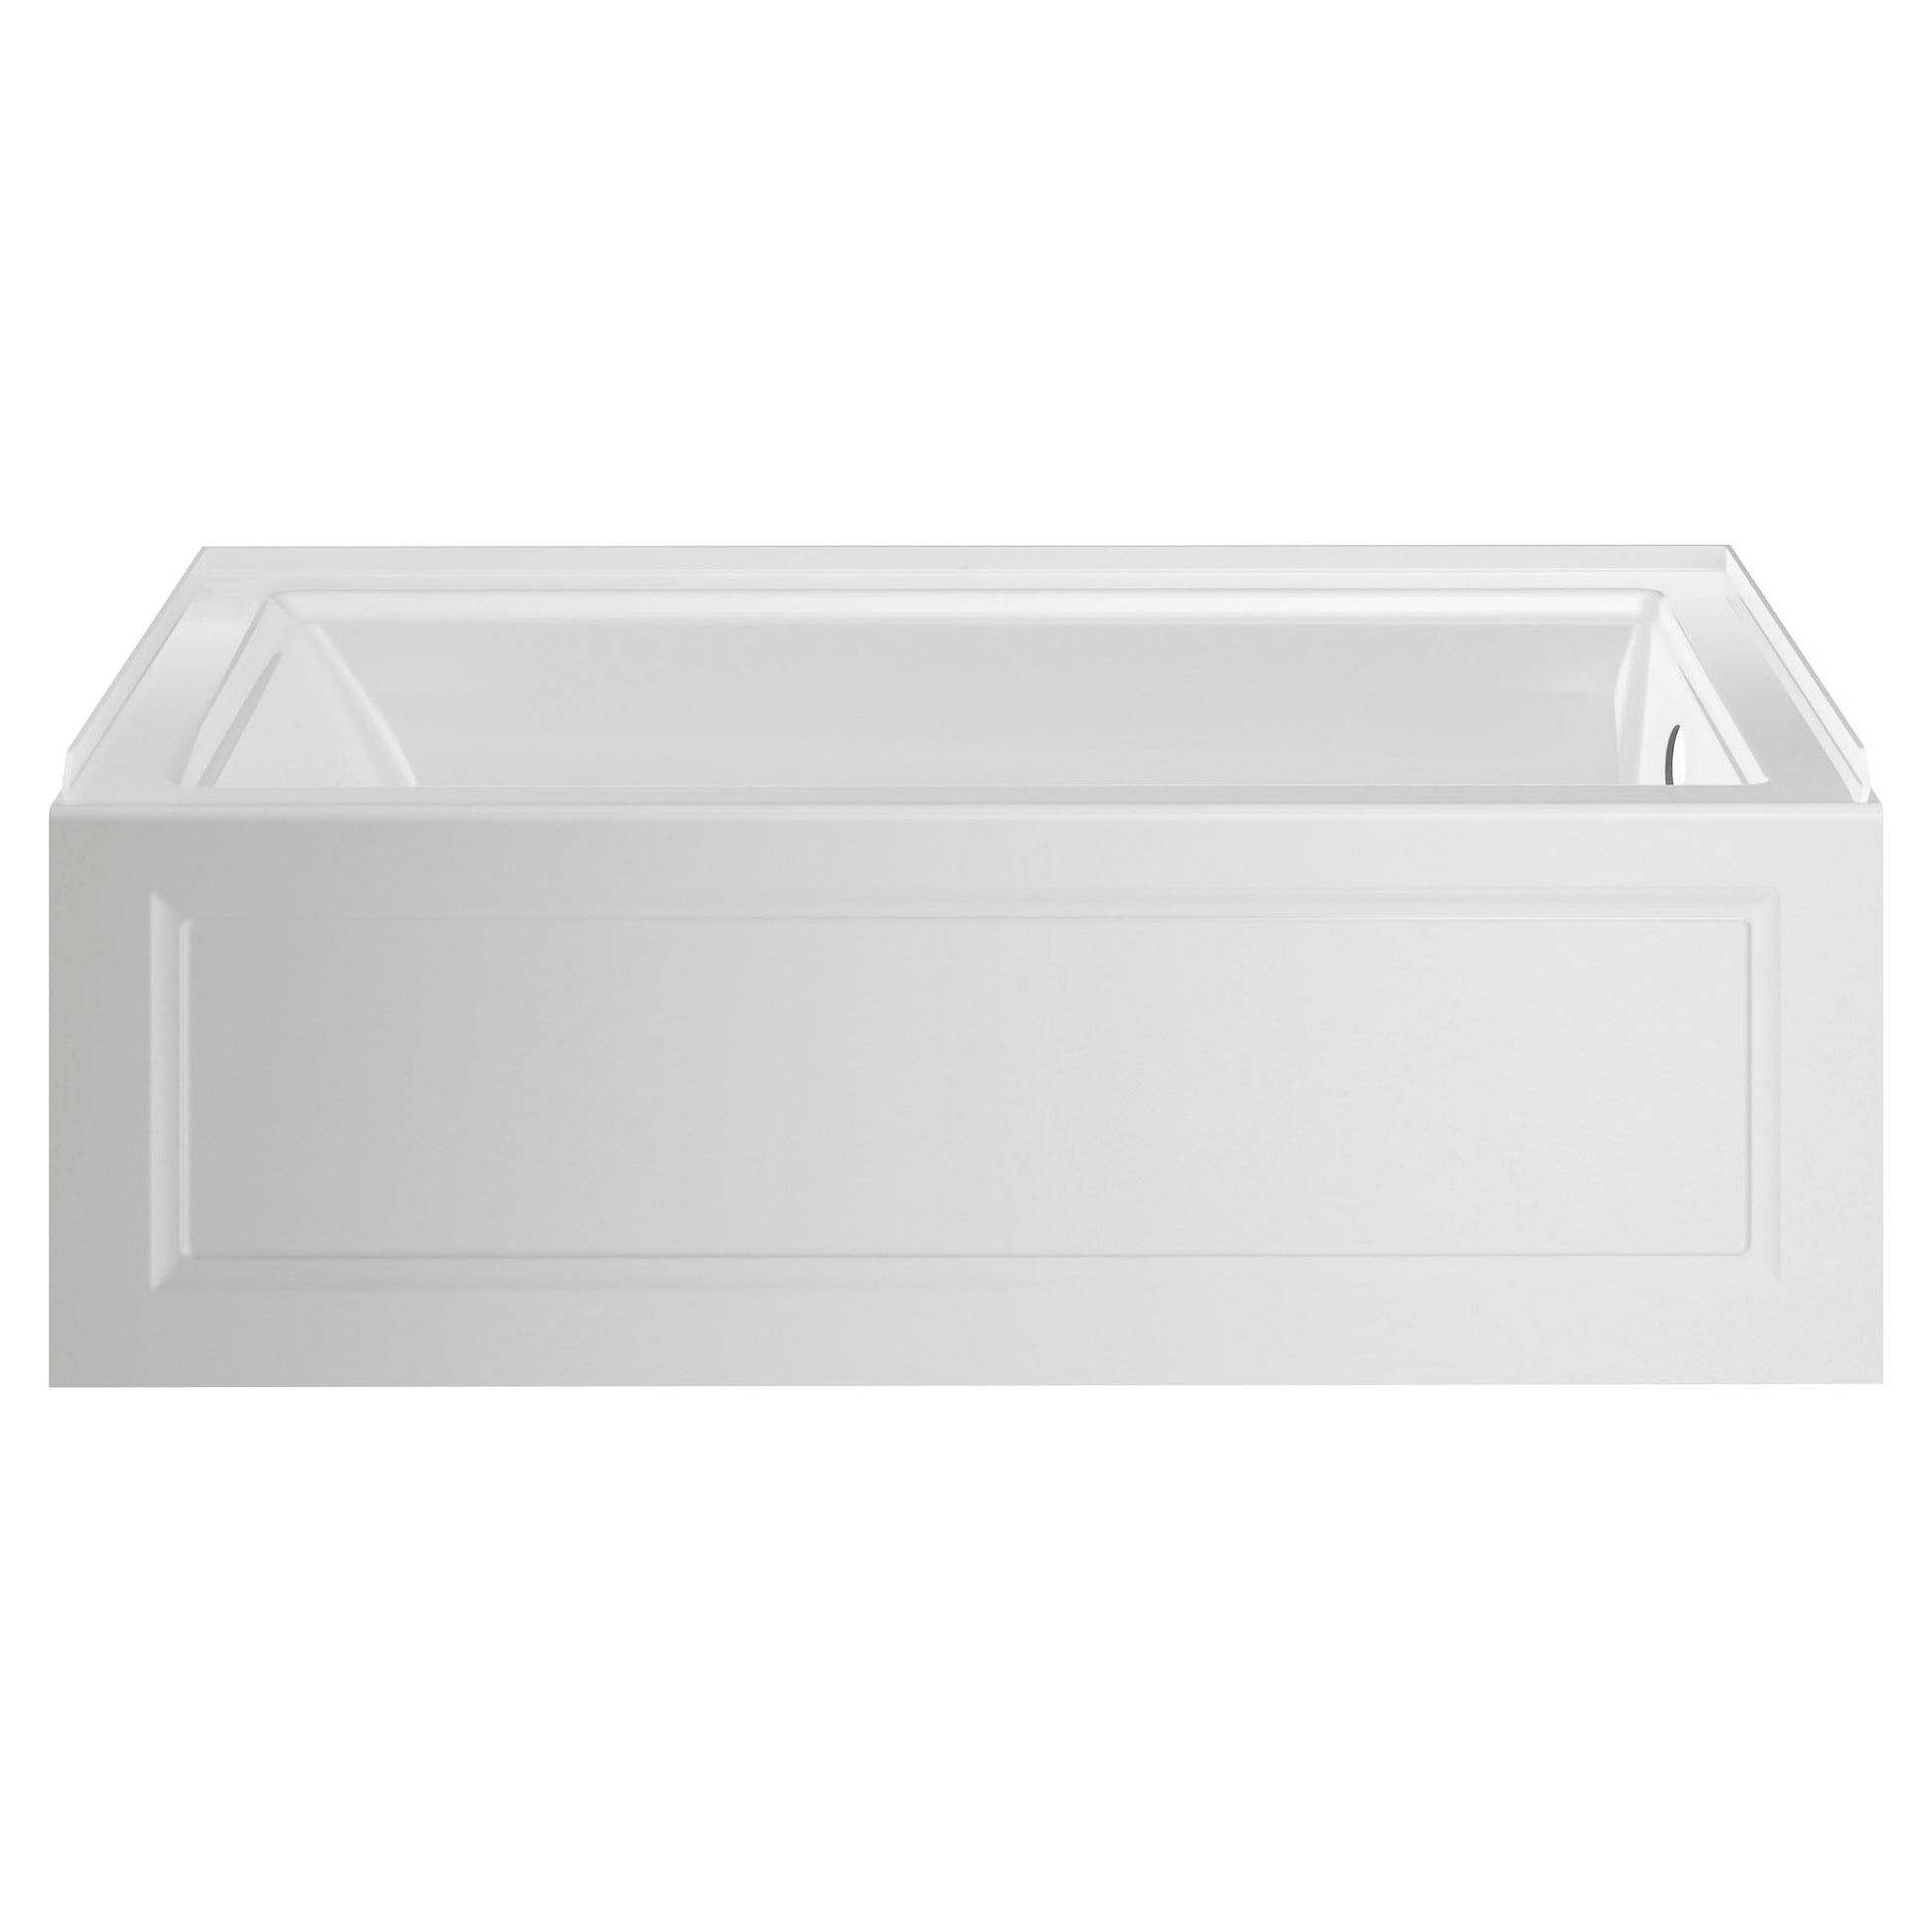 AMERICAN-STANDARD 2544102.020, Town Square S 60 x 32-Inch Integral Apron Bathtub With Right-Hand Outlet in White